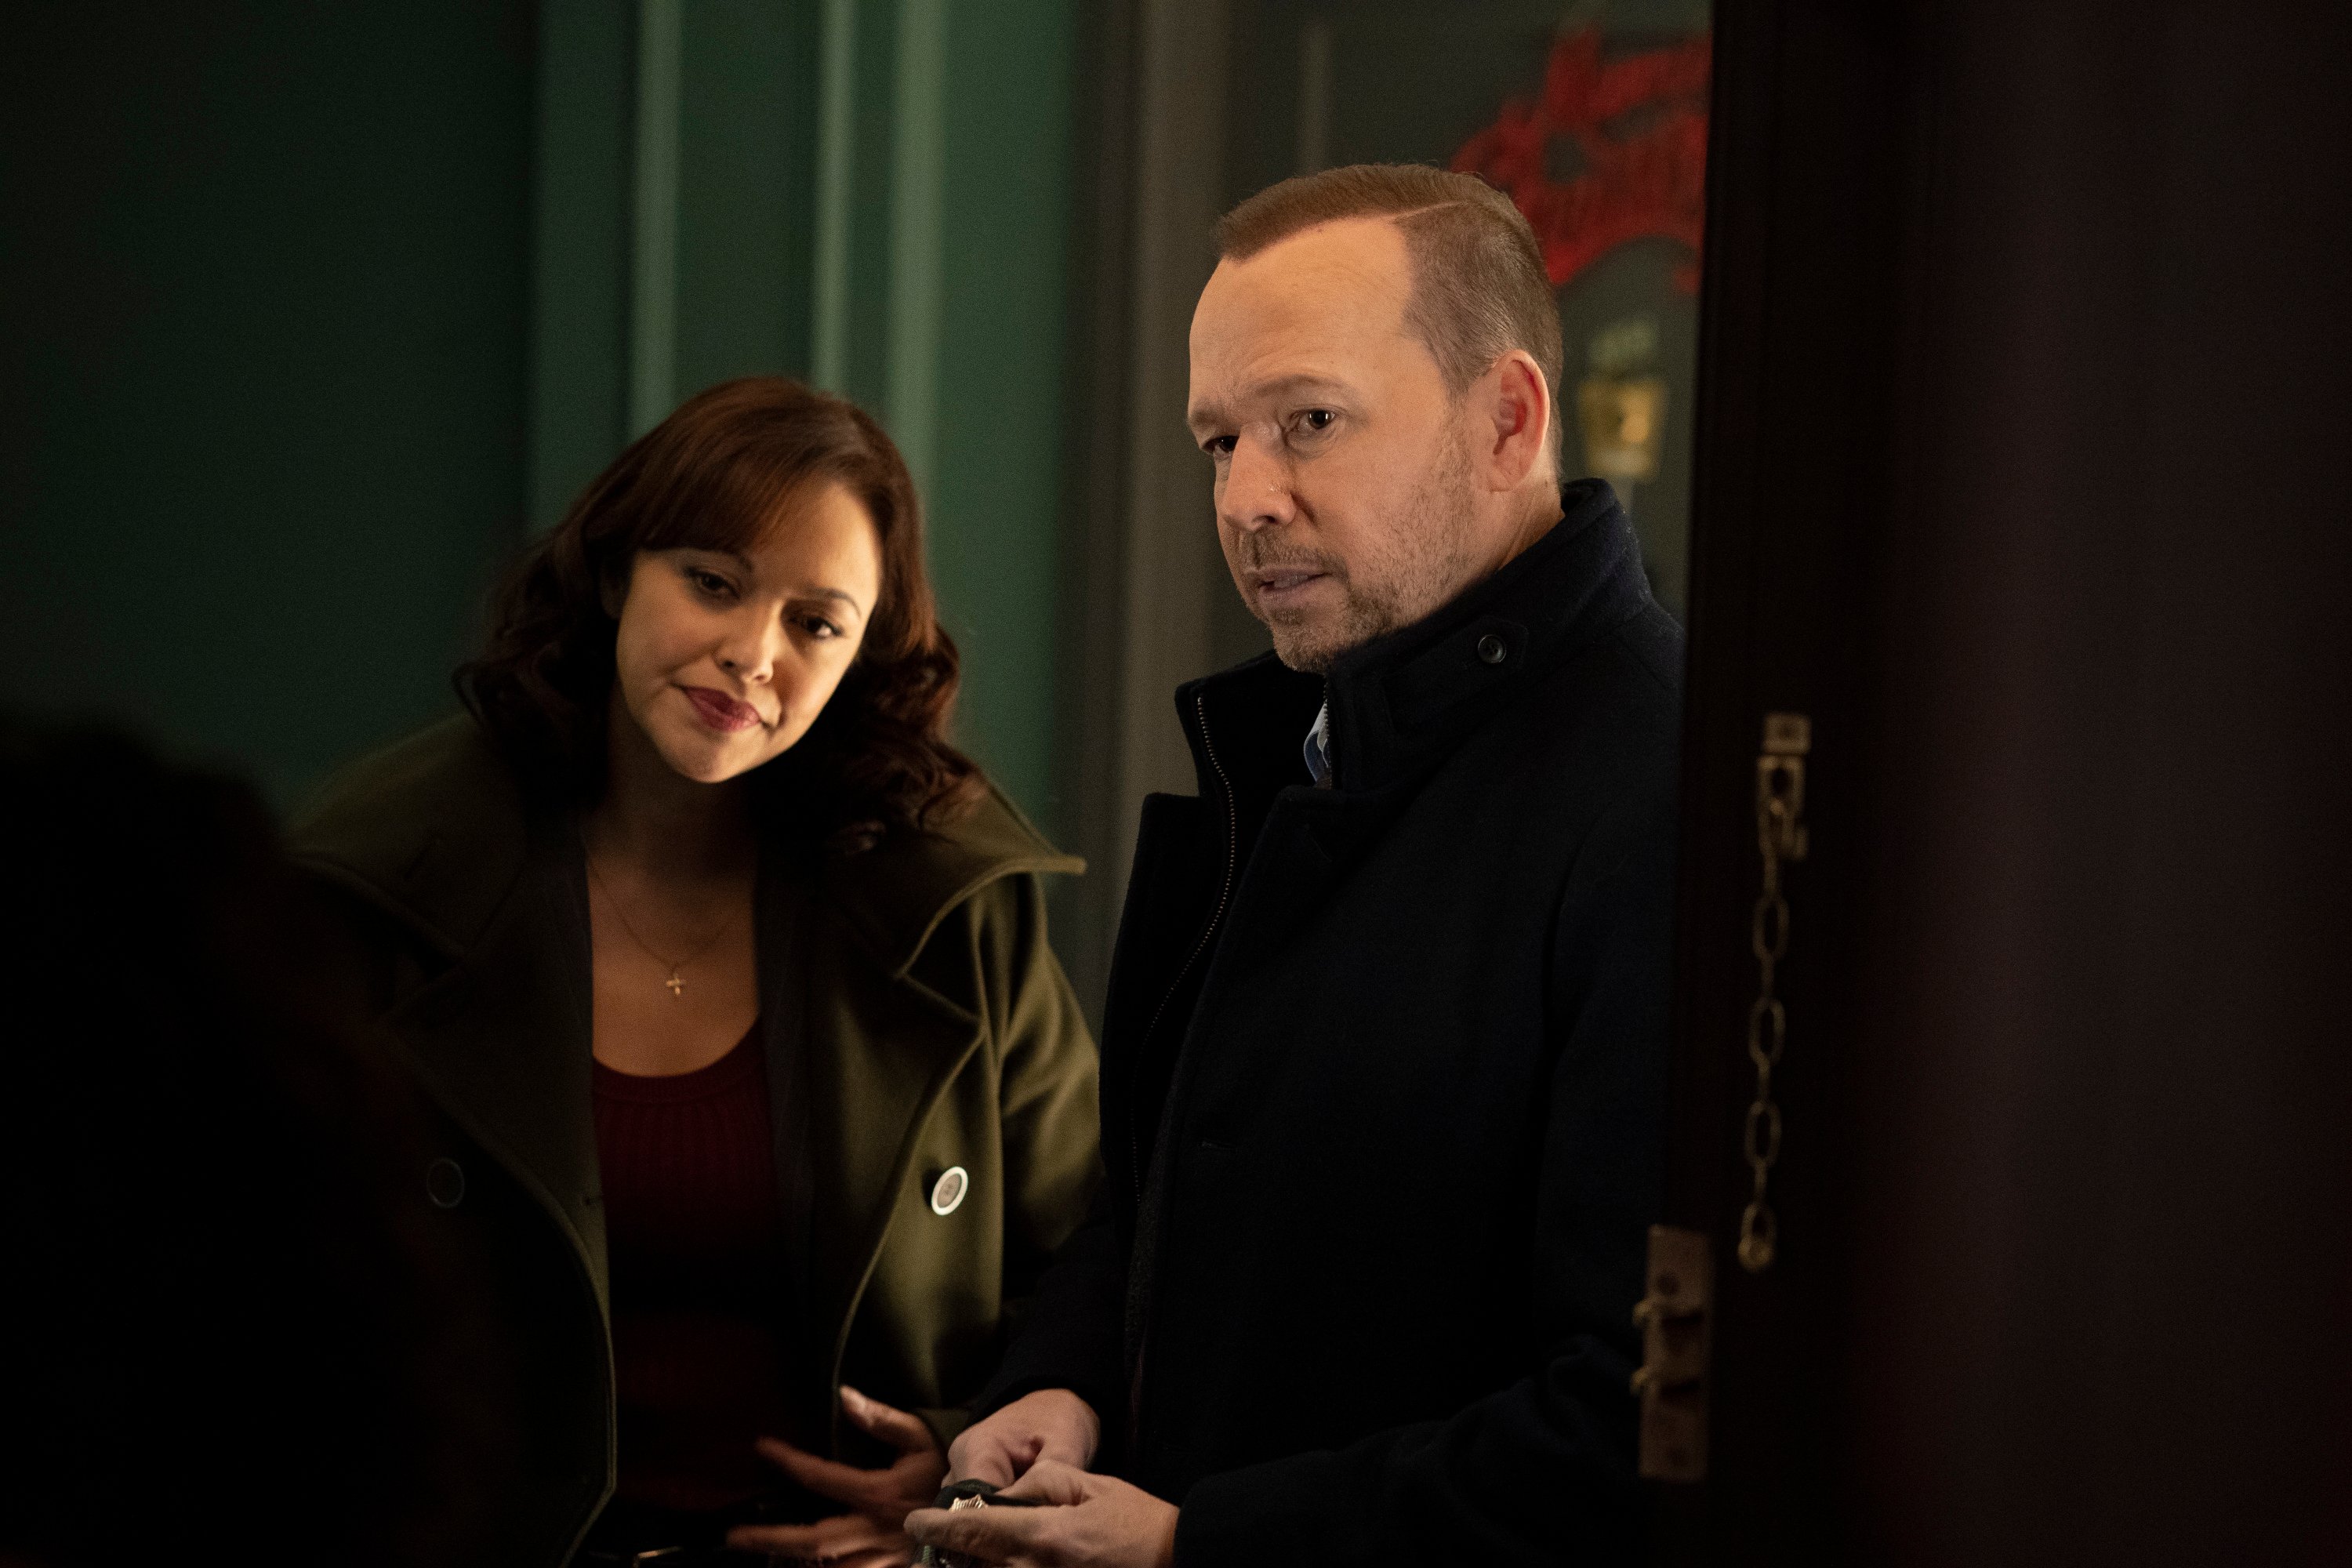 Marisa Ramirez as Maria Baez and Donnie Wahlberg as Danny Reagan stand next to each other as they talk to someone.